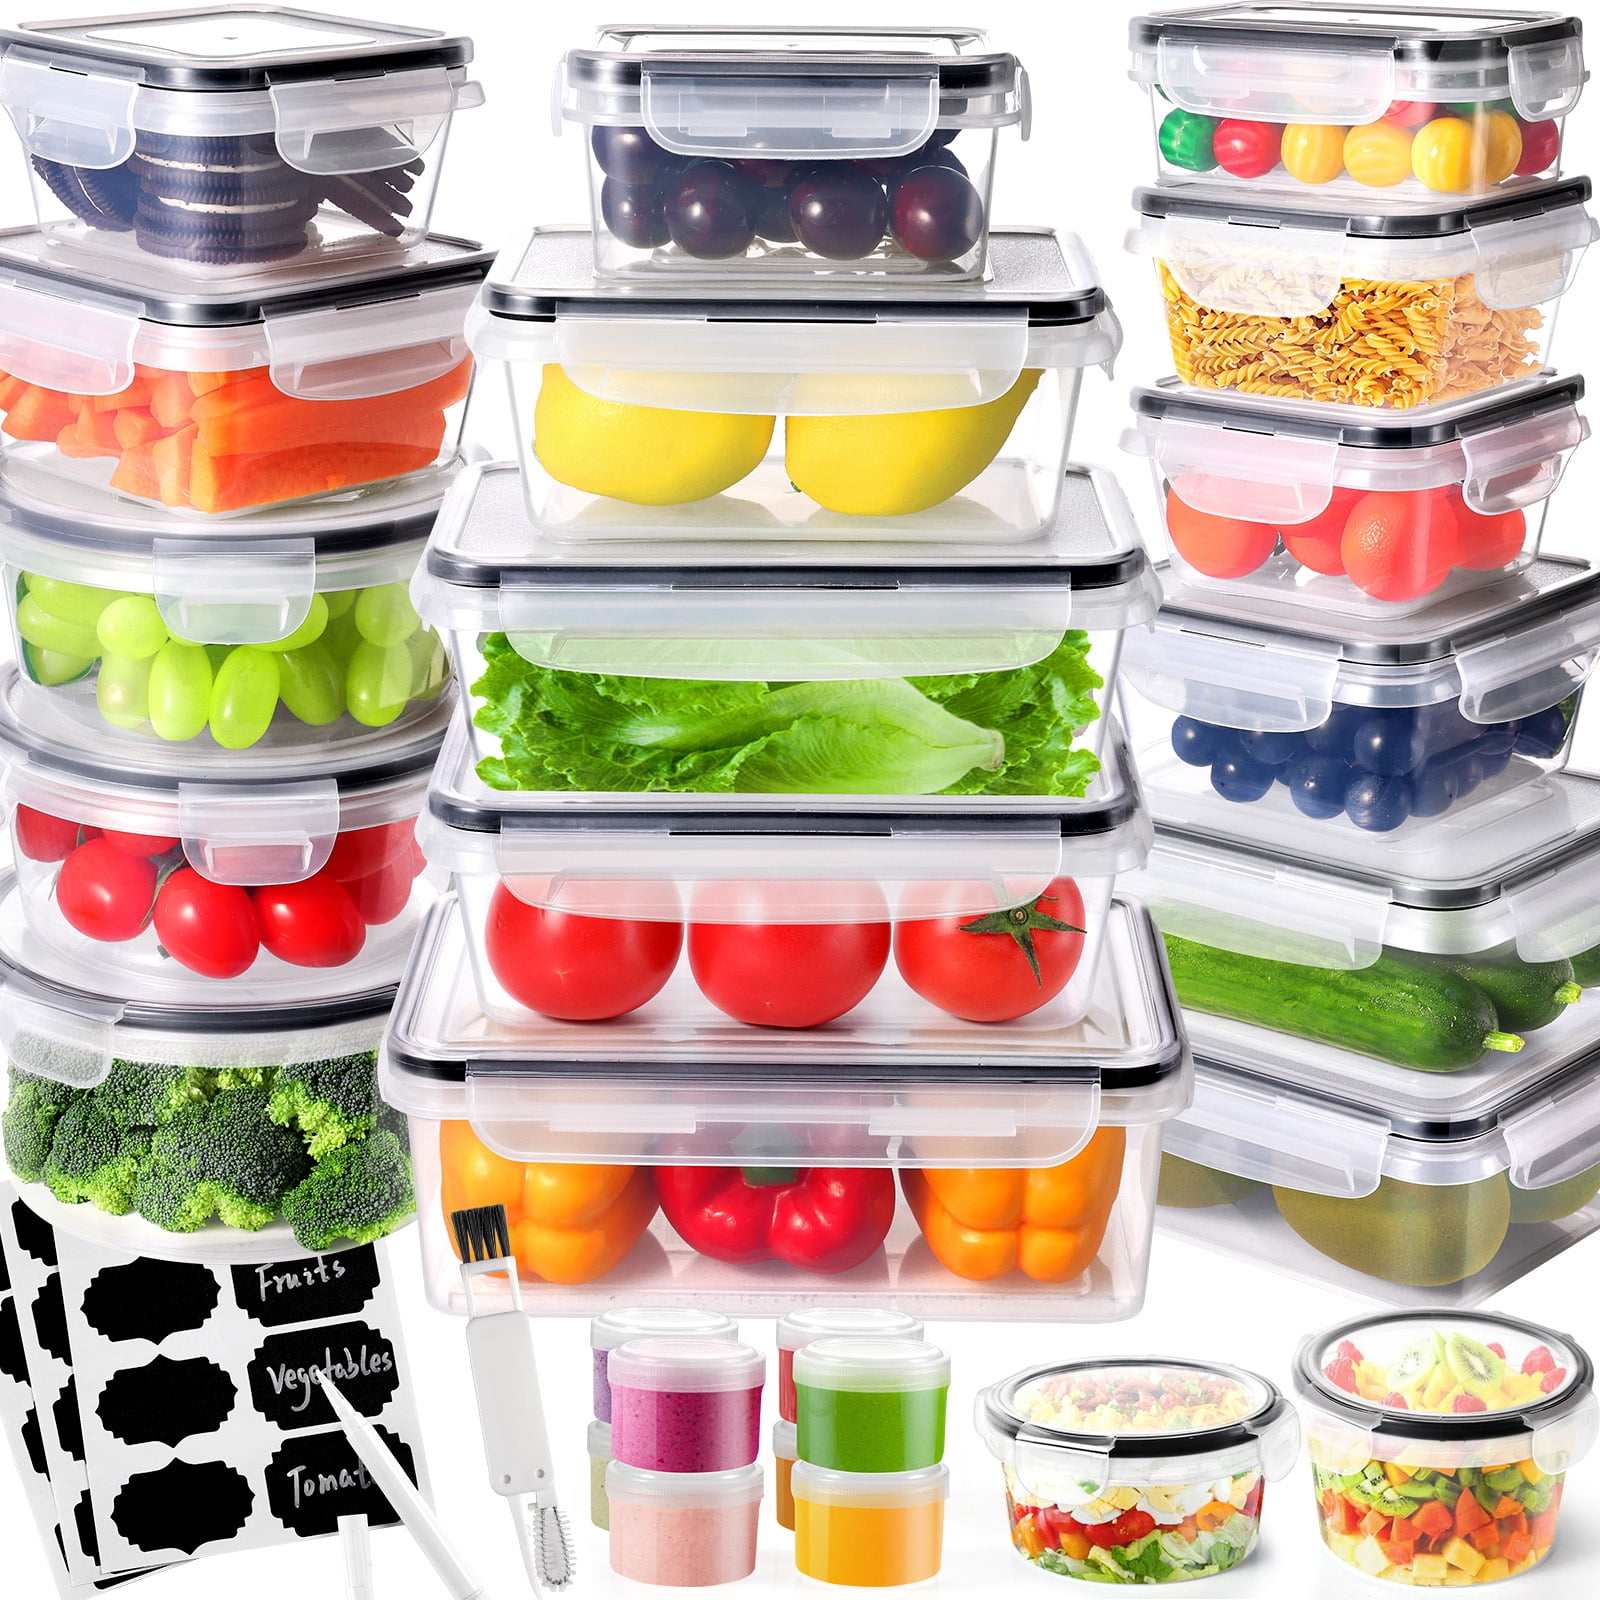 Bentgo® Prep Quick and Easy Meal Prep Containers, 10 pc - Gerbes Super  Markets